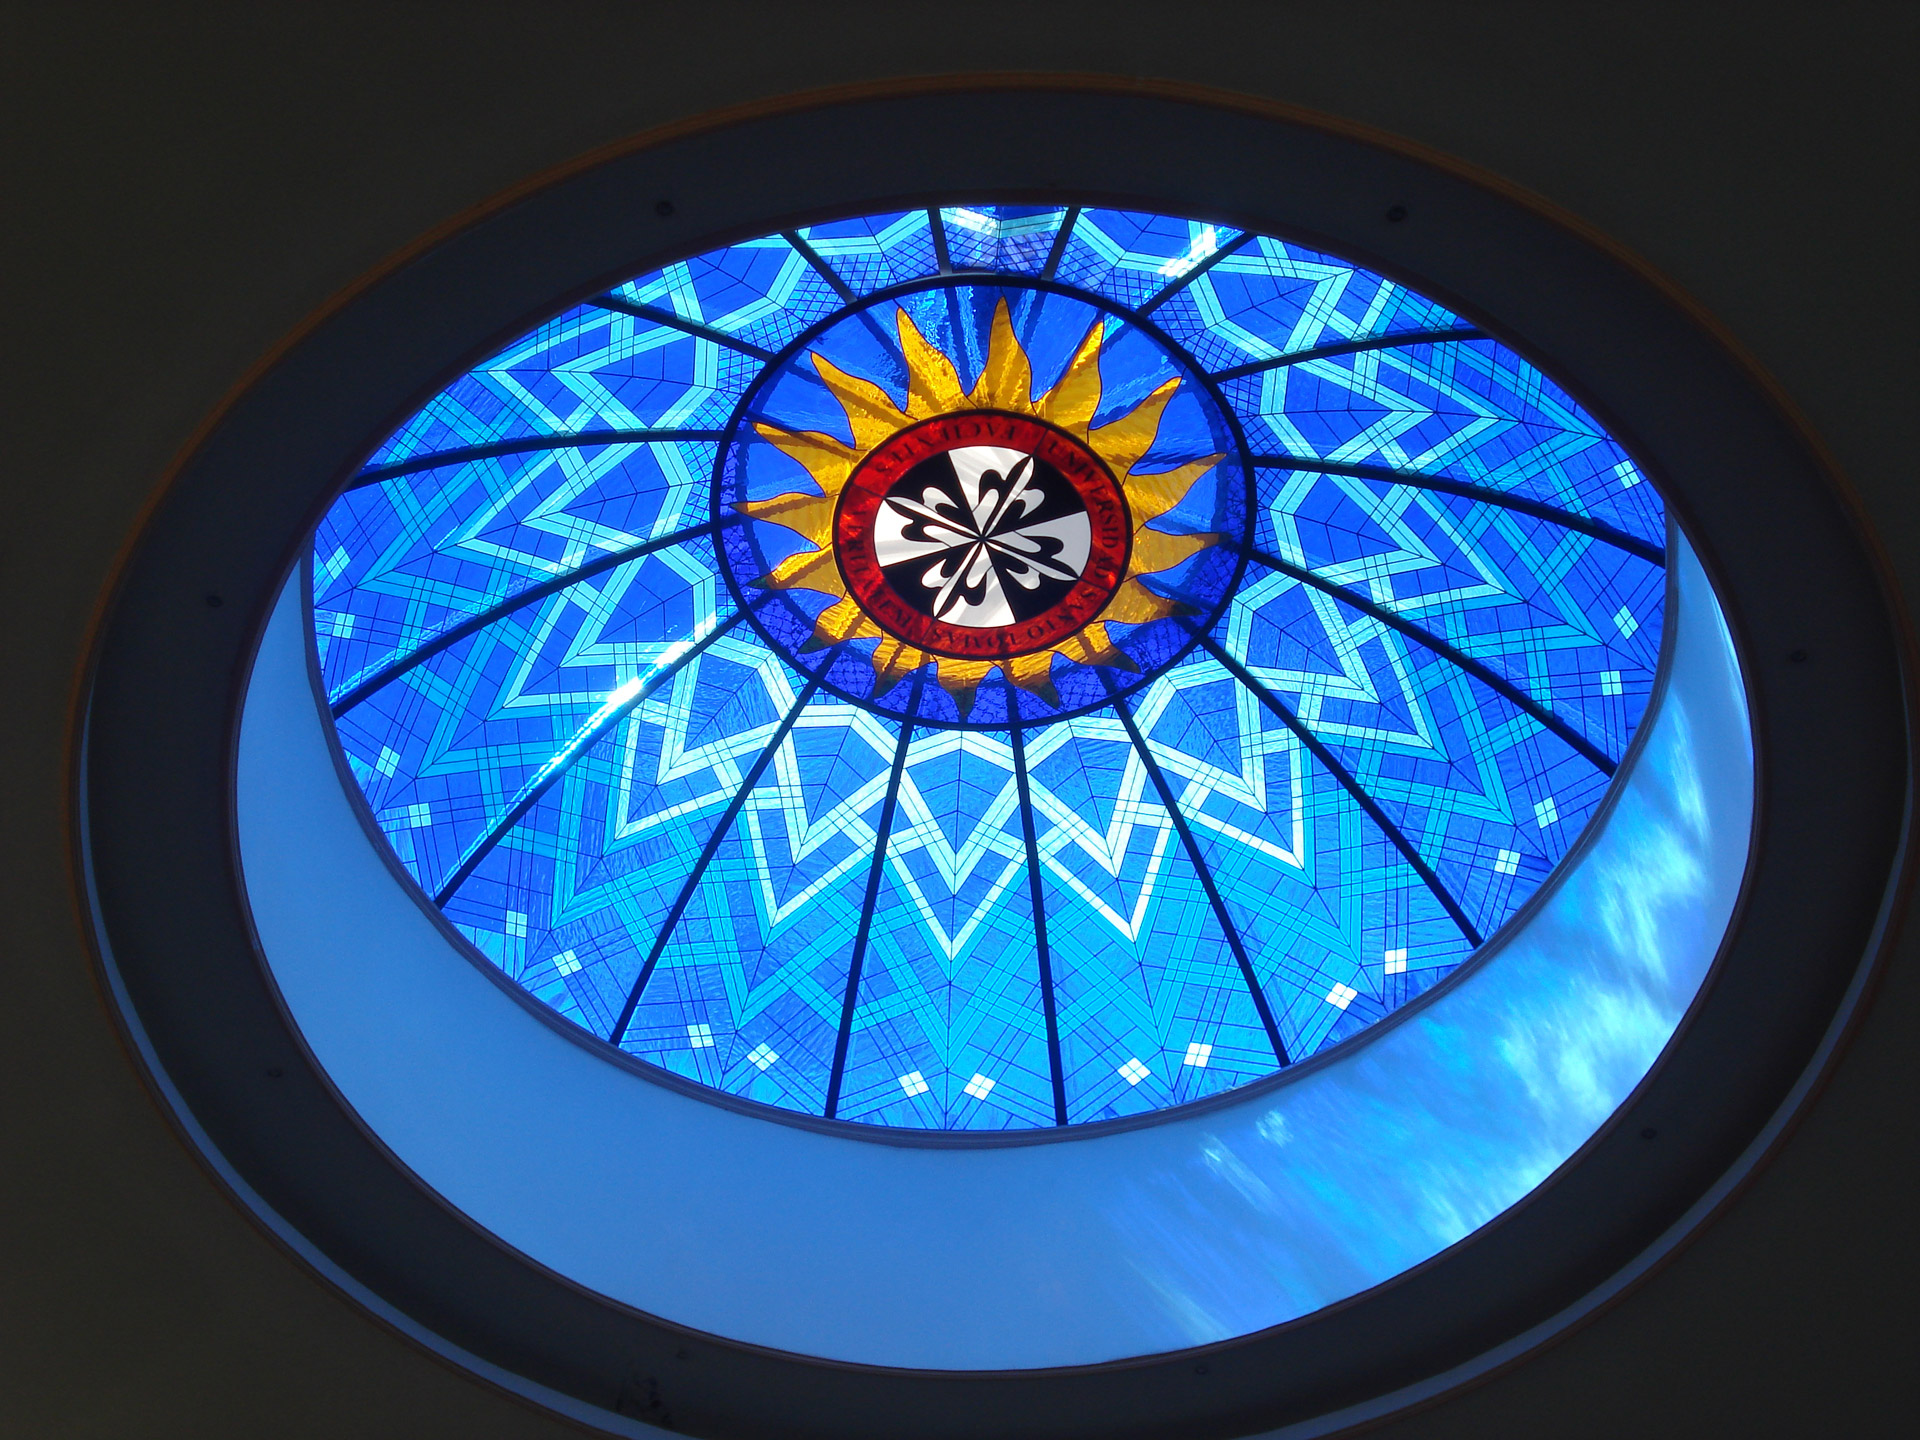 stained glass dome bogota colombia free photo